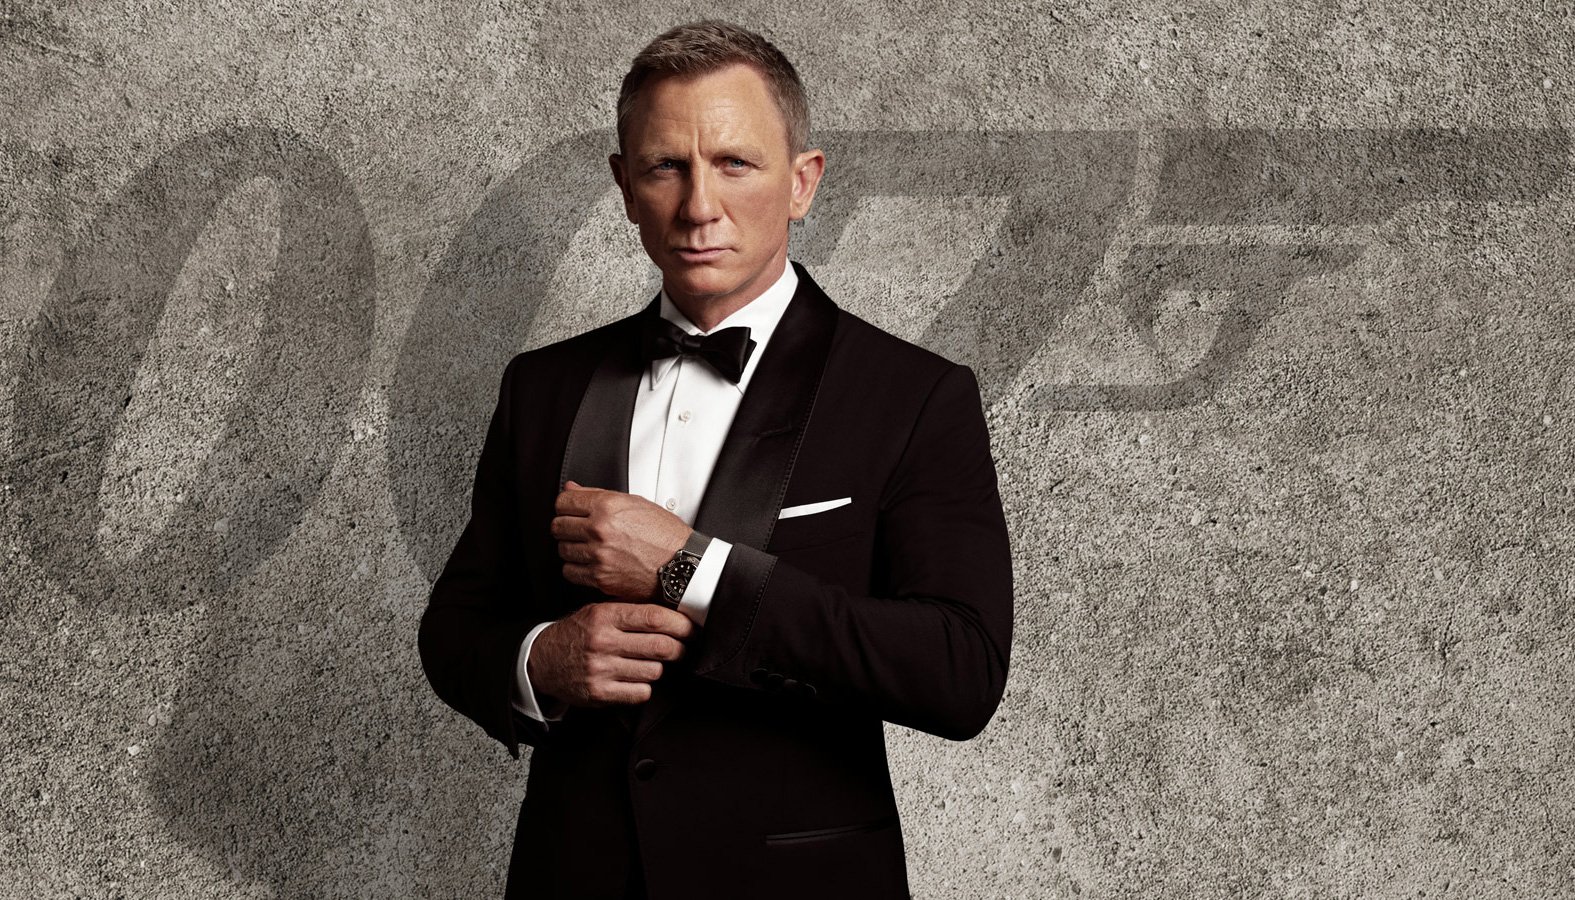 No Time To Die - New James Bond Film Given South African Release Date!!!